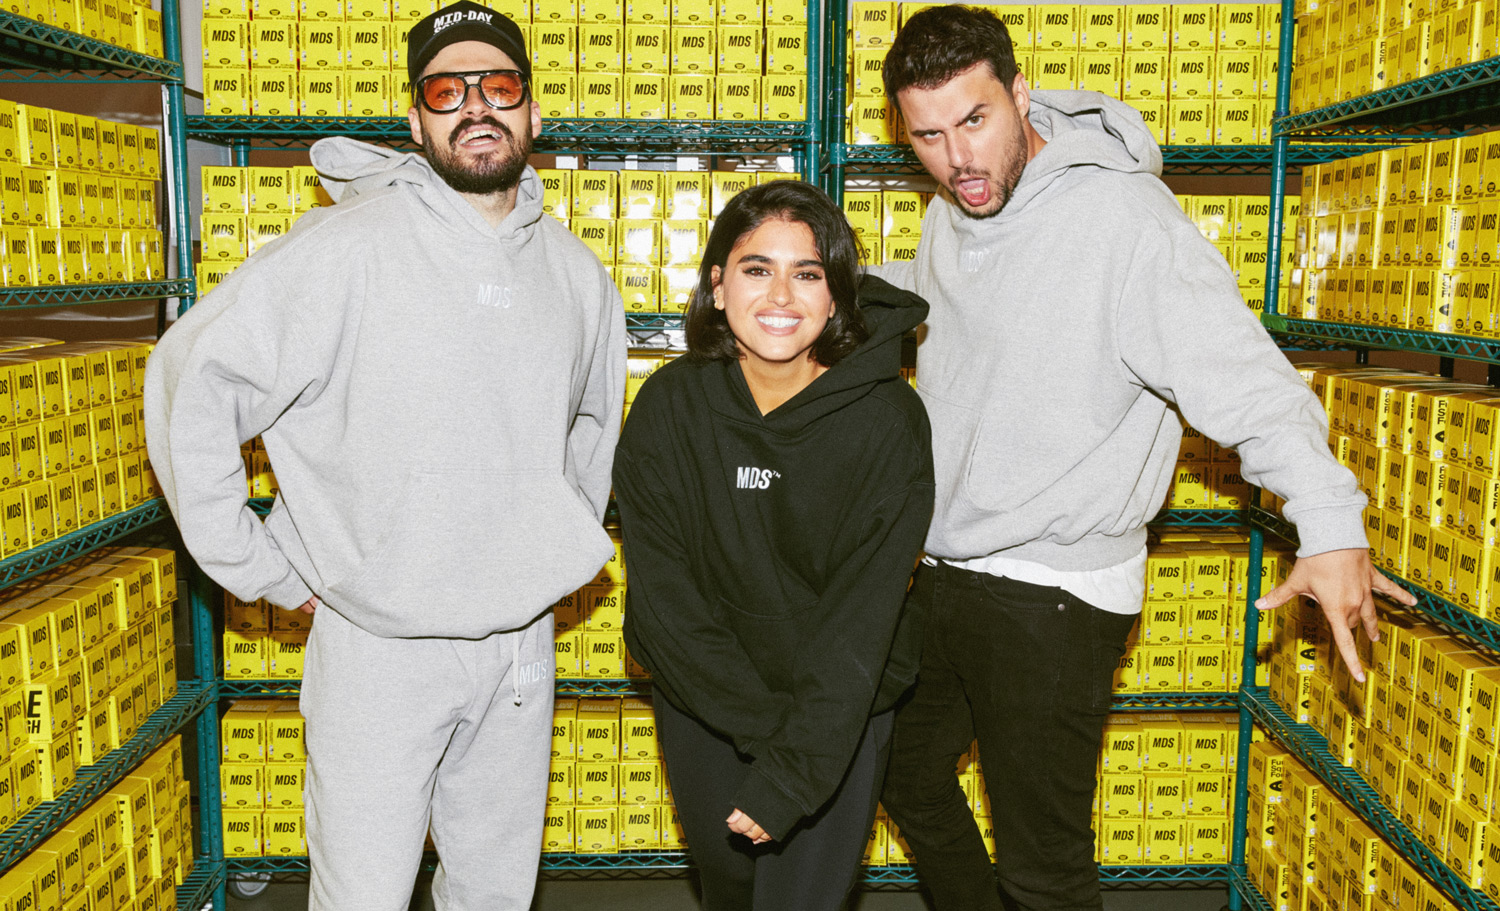 Three people stand before shelves full of product boxes. The two men wear grey branded hoodies while the woman in the middle wears a similar hoodie in black.